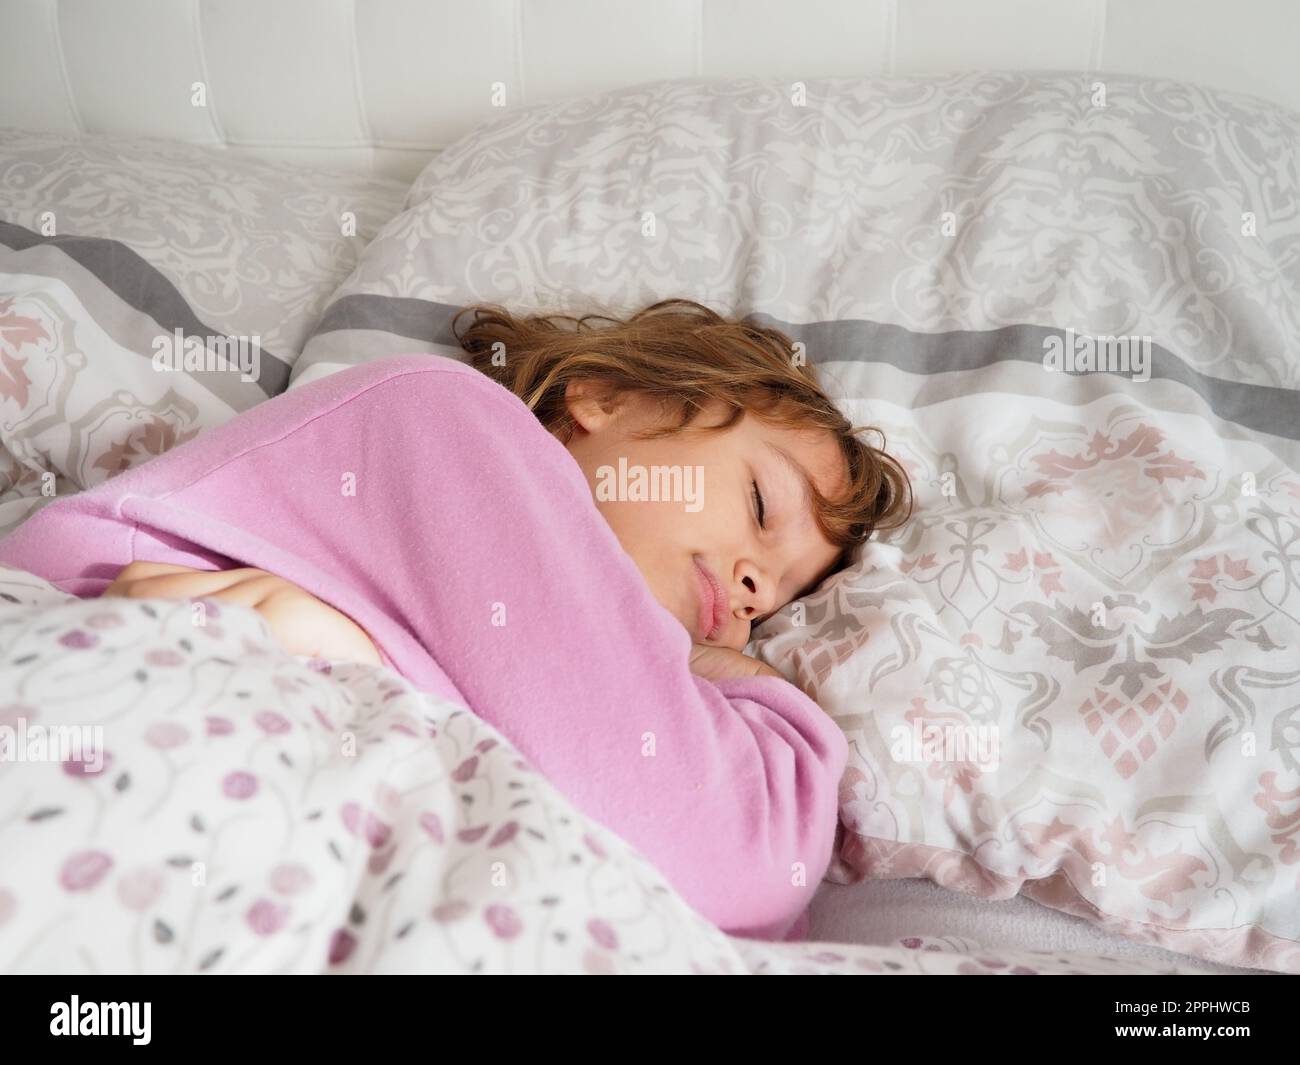 Child in pajamas sleeping in his bed without blankets, illuminated by the  light that filters through the window Stock Photo - Alamy